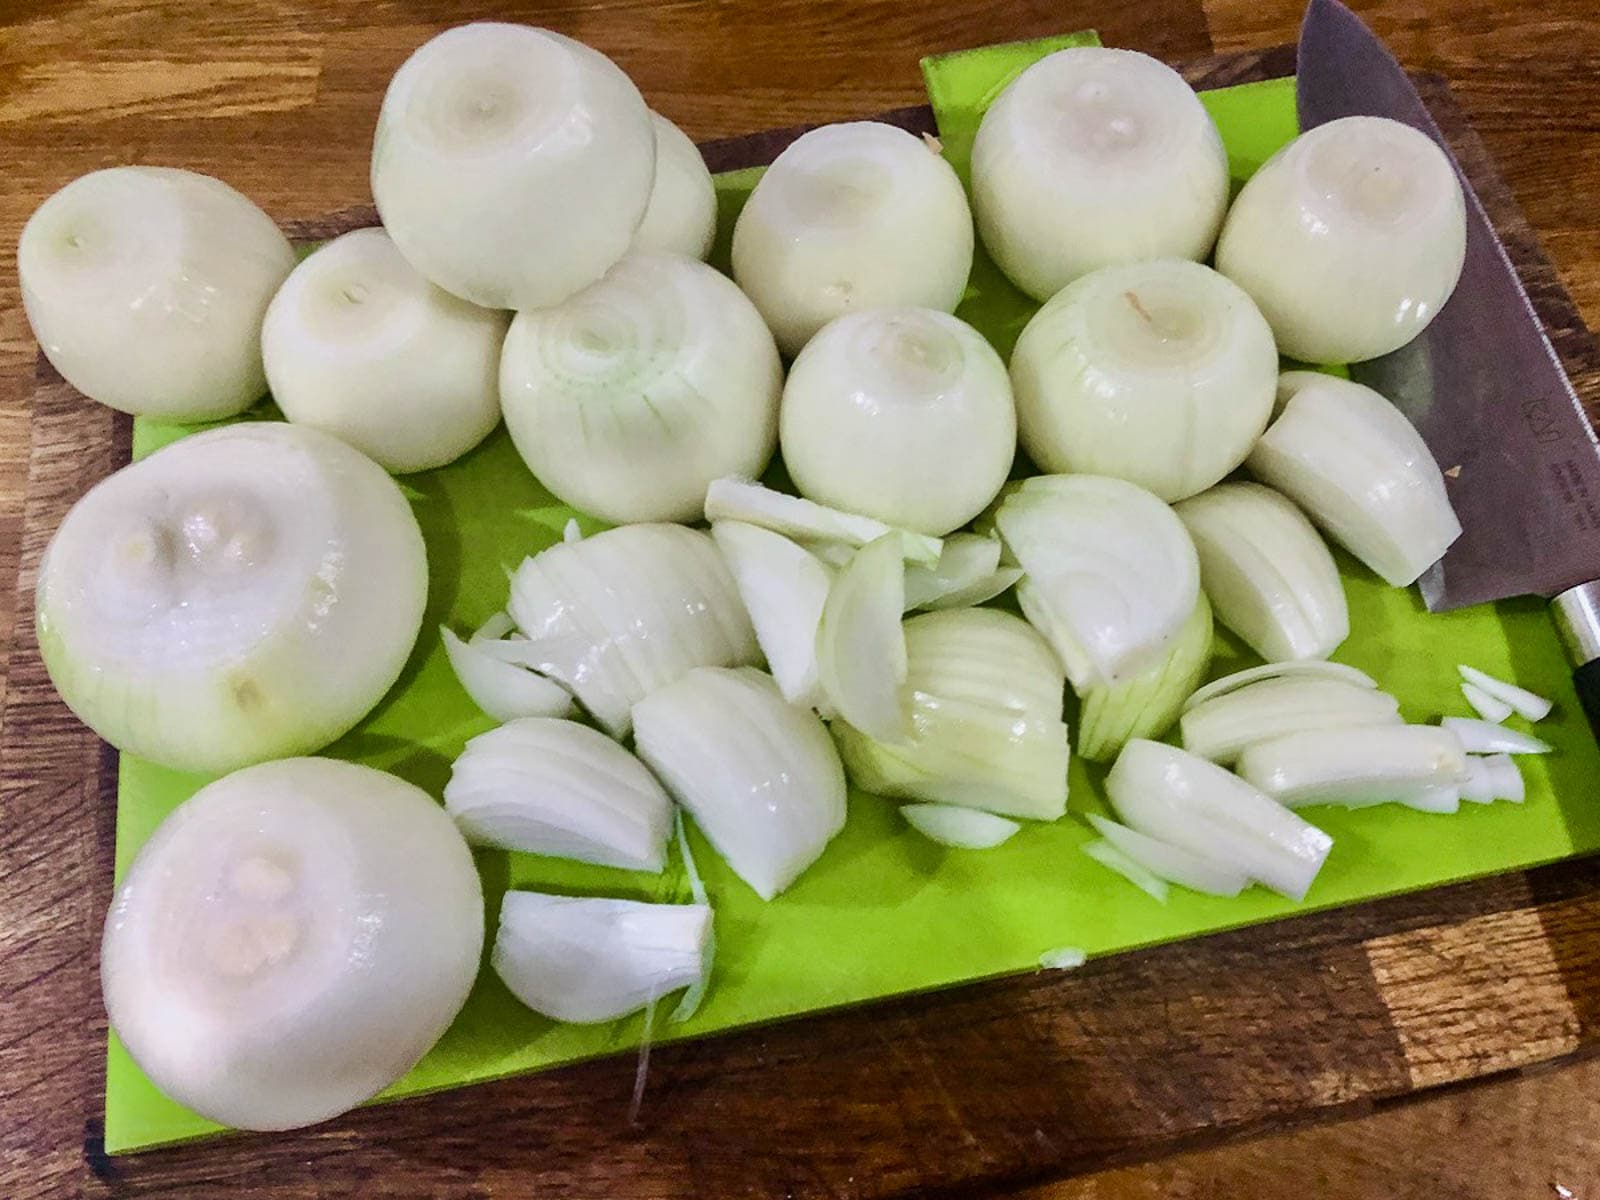 A full chopping board of peeled onions to be turned into soup